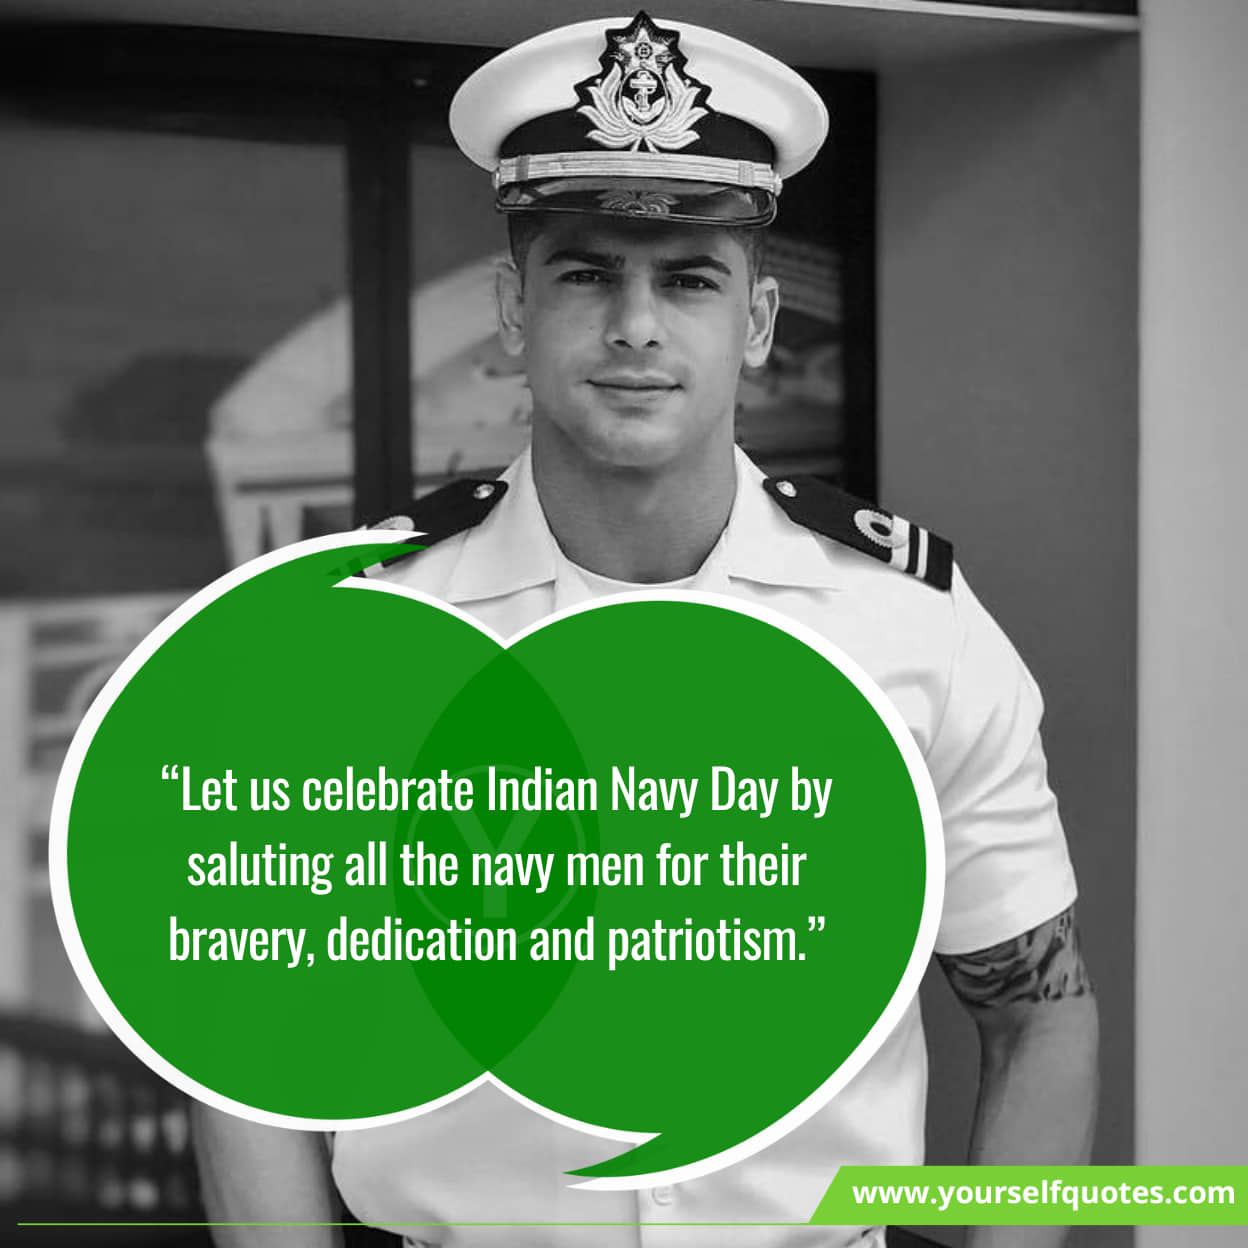 Wishes For Indian Navy Day